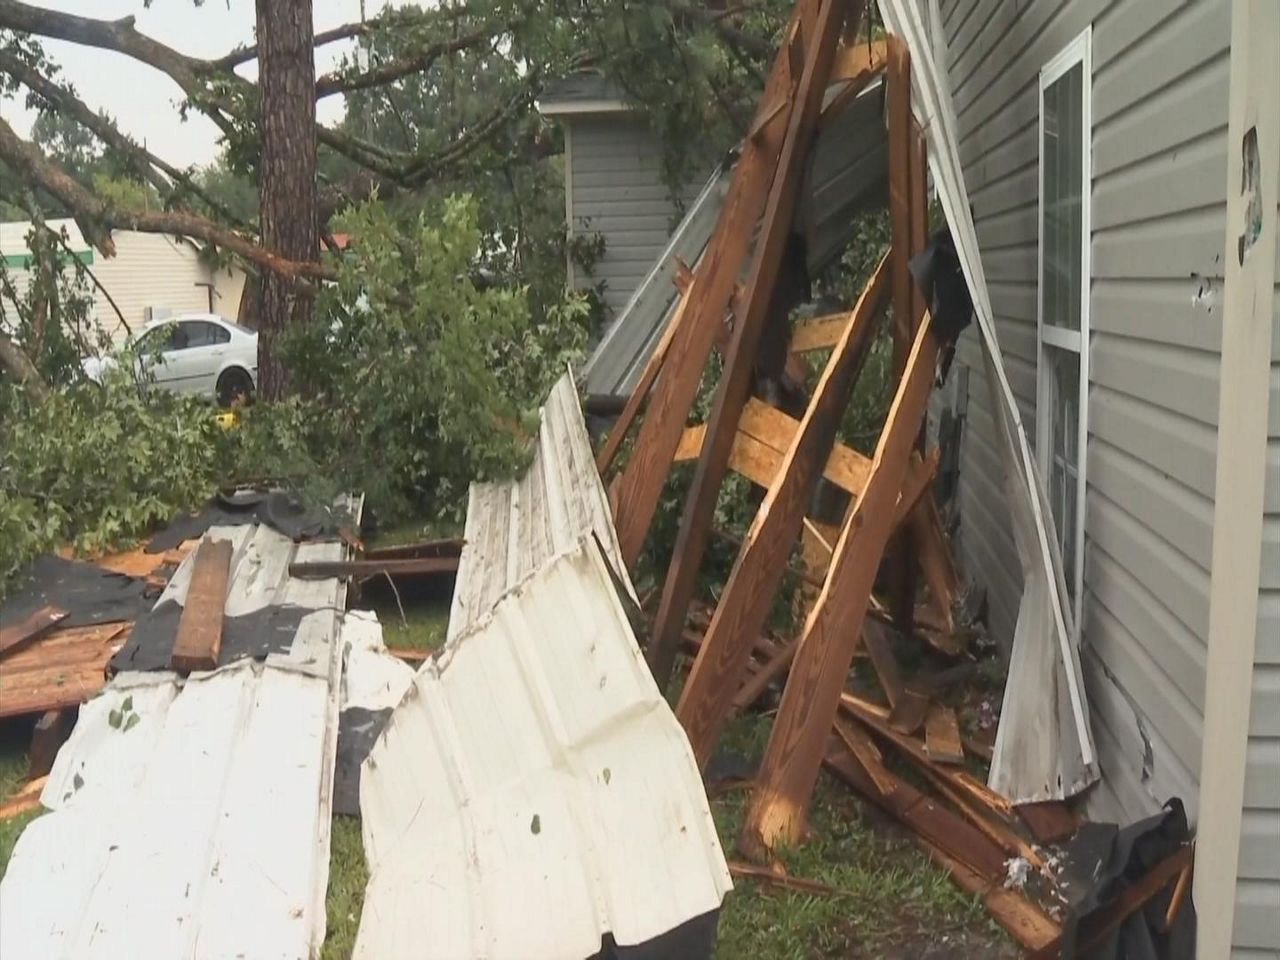 Storm damage clean-up underway in Johnston County